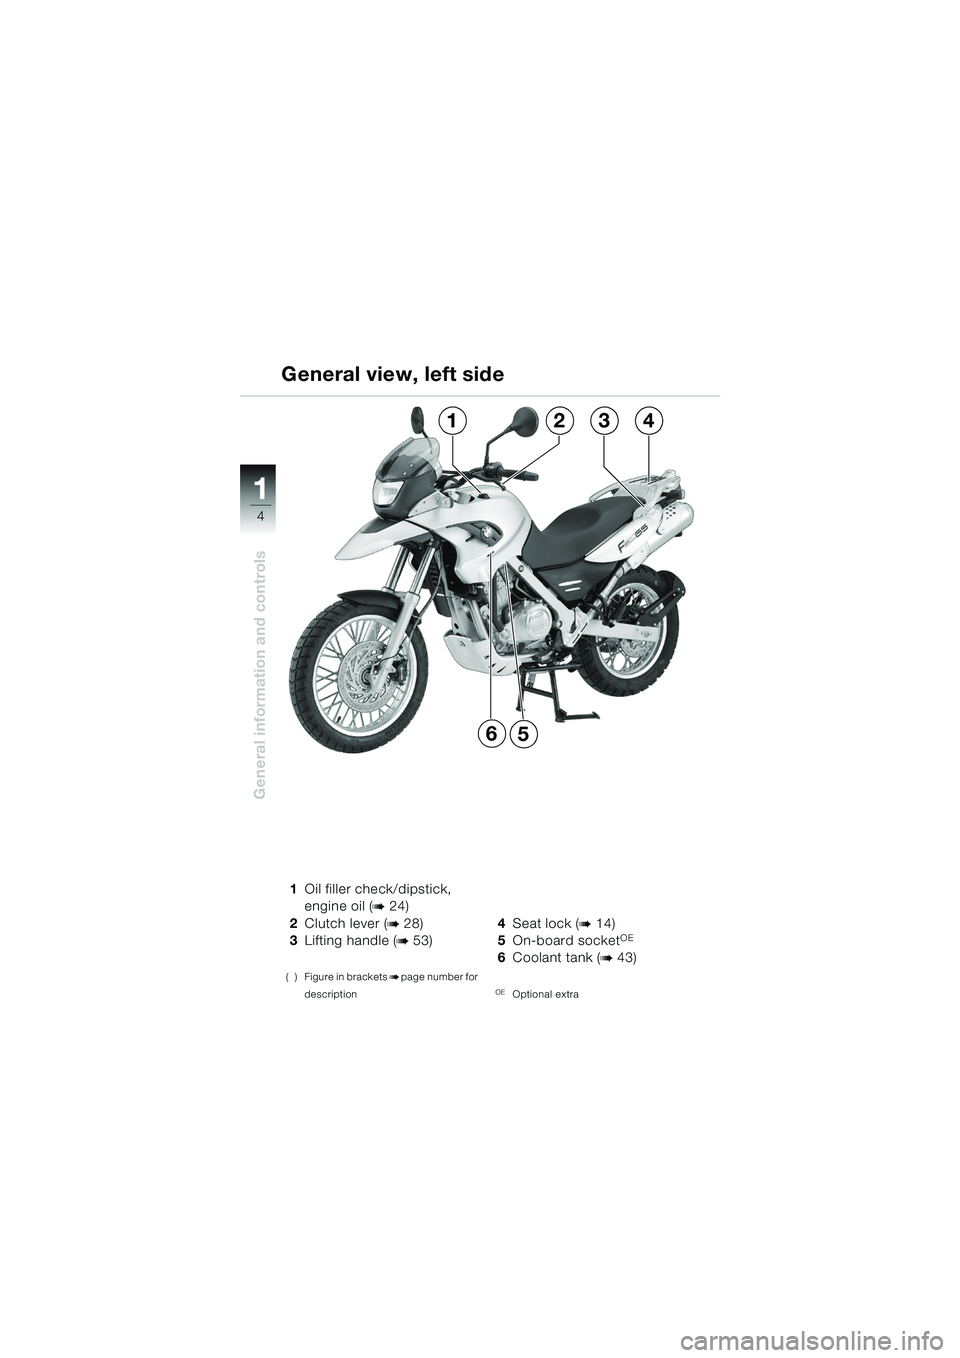 BMW MOTORRAD F 650 GS DAKAR 2003  Riders Manual (in English) 11
4
General information and controls
1Oil filler check/dipstick, 
engine oil (
b24)
2 Clutch lever (
b28)
3 Lifting handle (
b53)
( ) Figure in bracketsbpage number for 
description
4 Seat lock (b14)